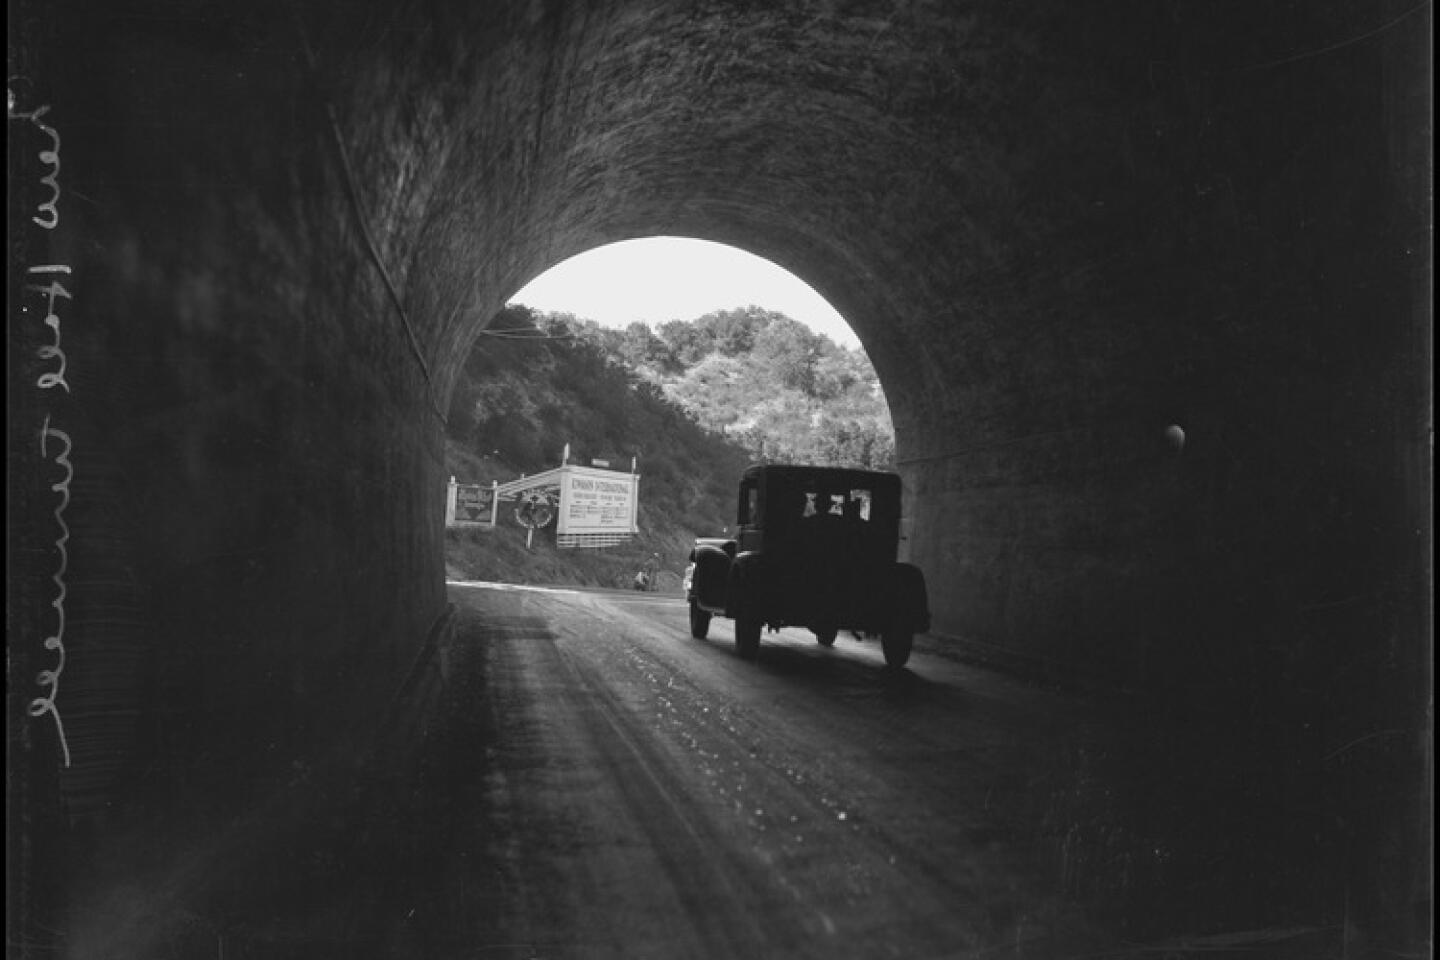 Newhall Tunnel in 1928